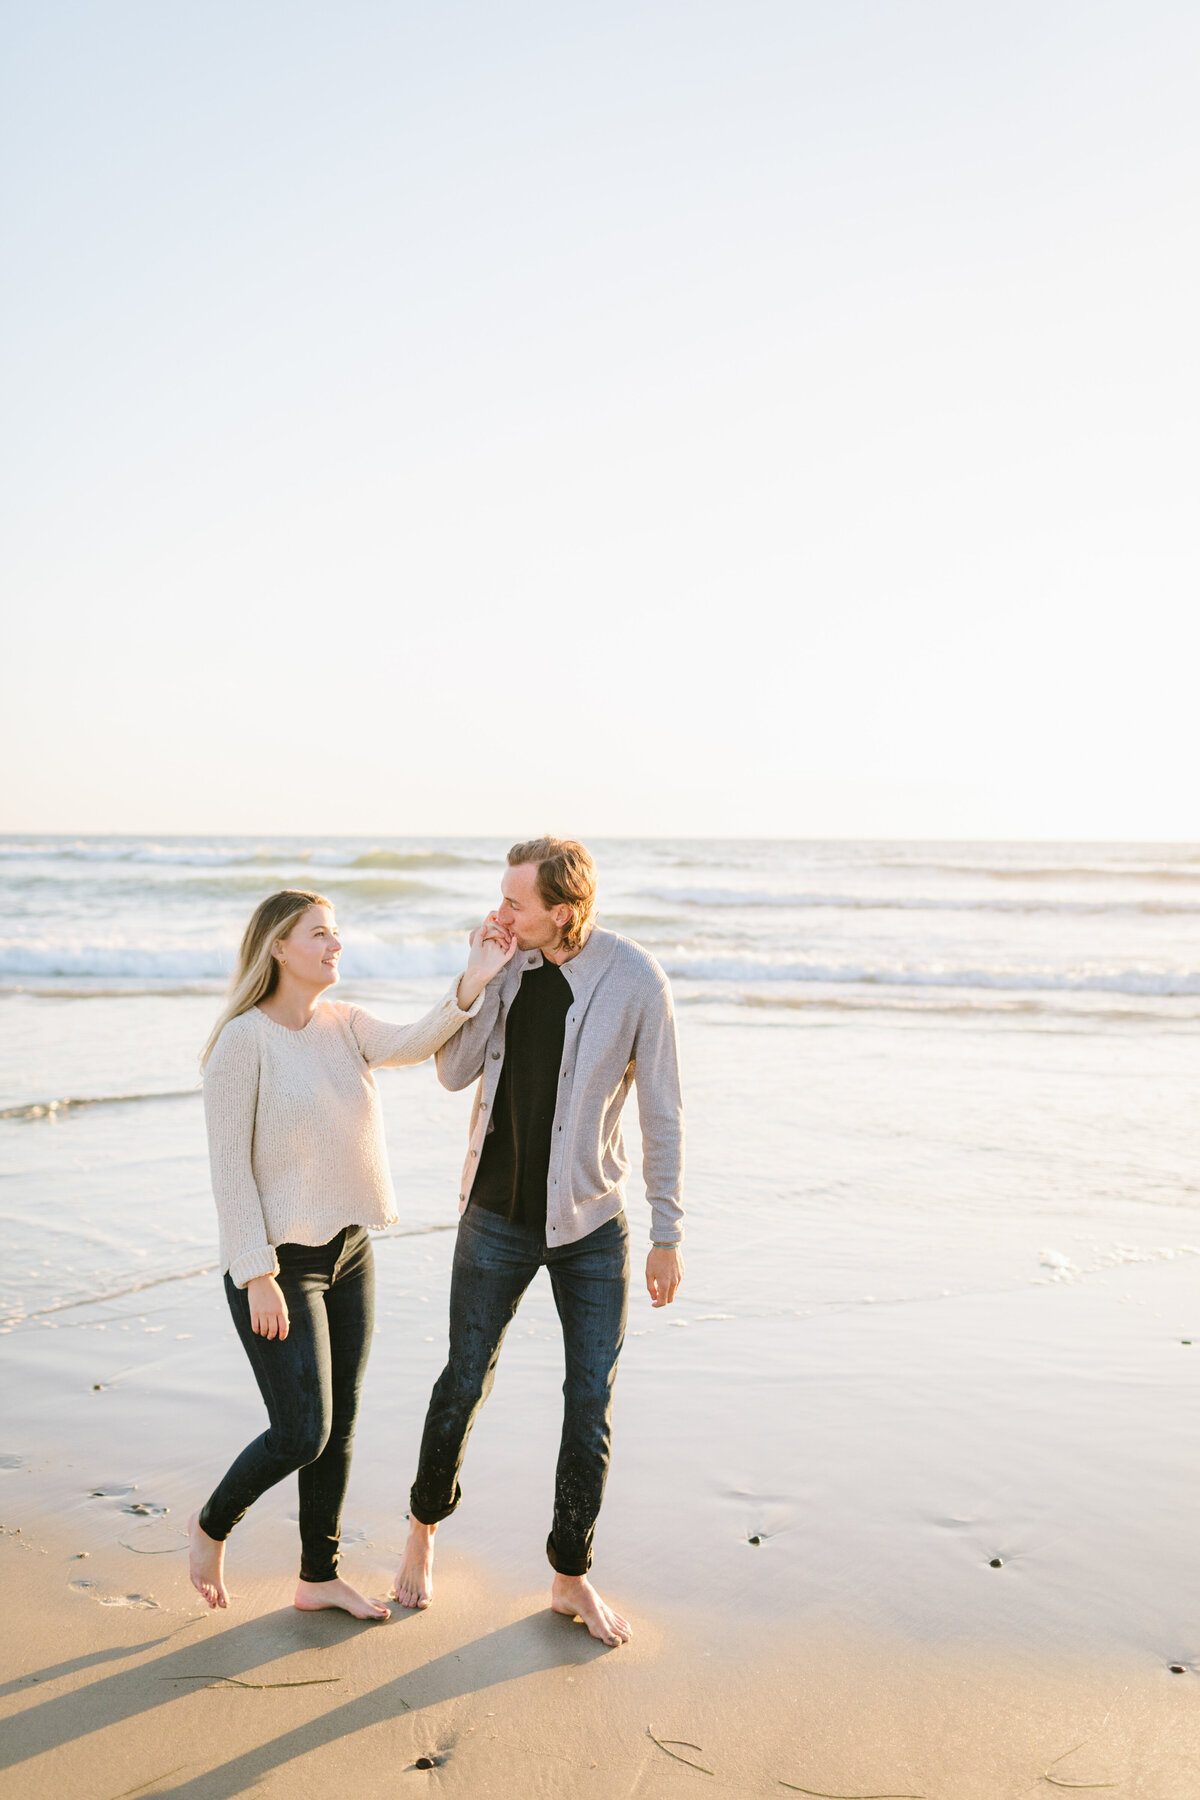 Best California and Texas Engagement Photographer-Jodee Debes Photography-124